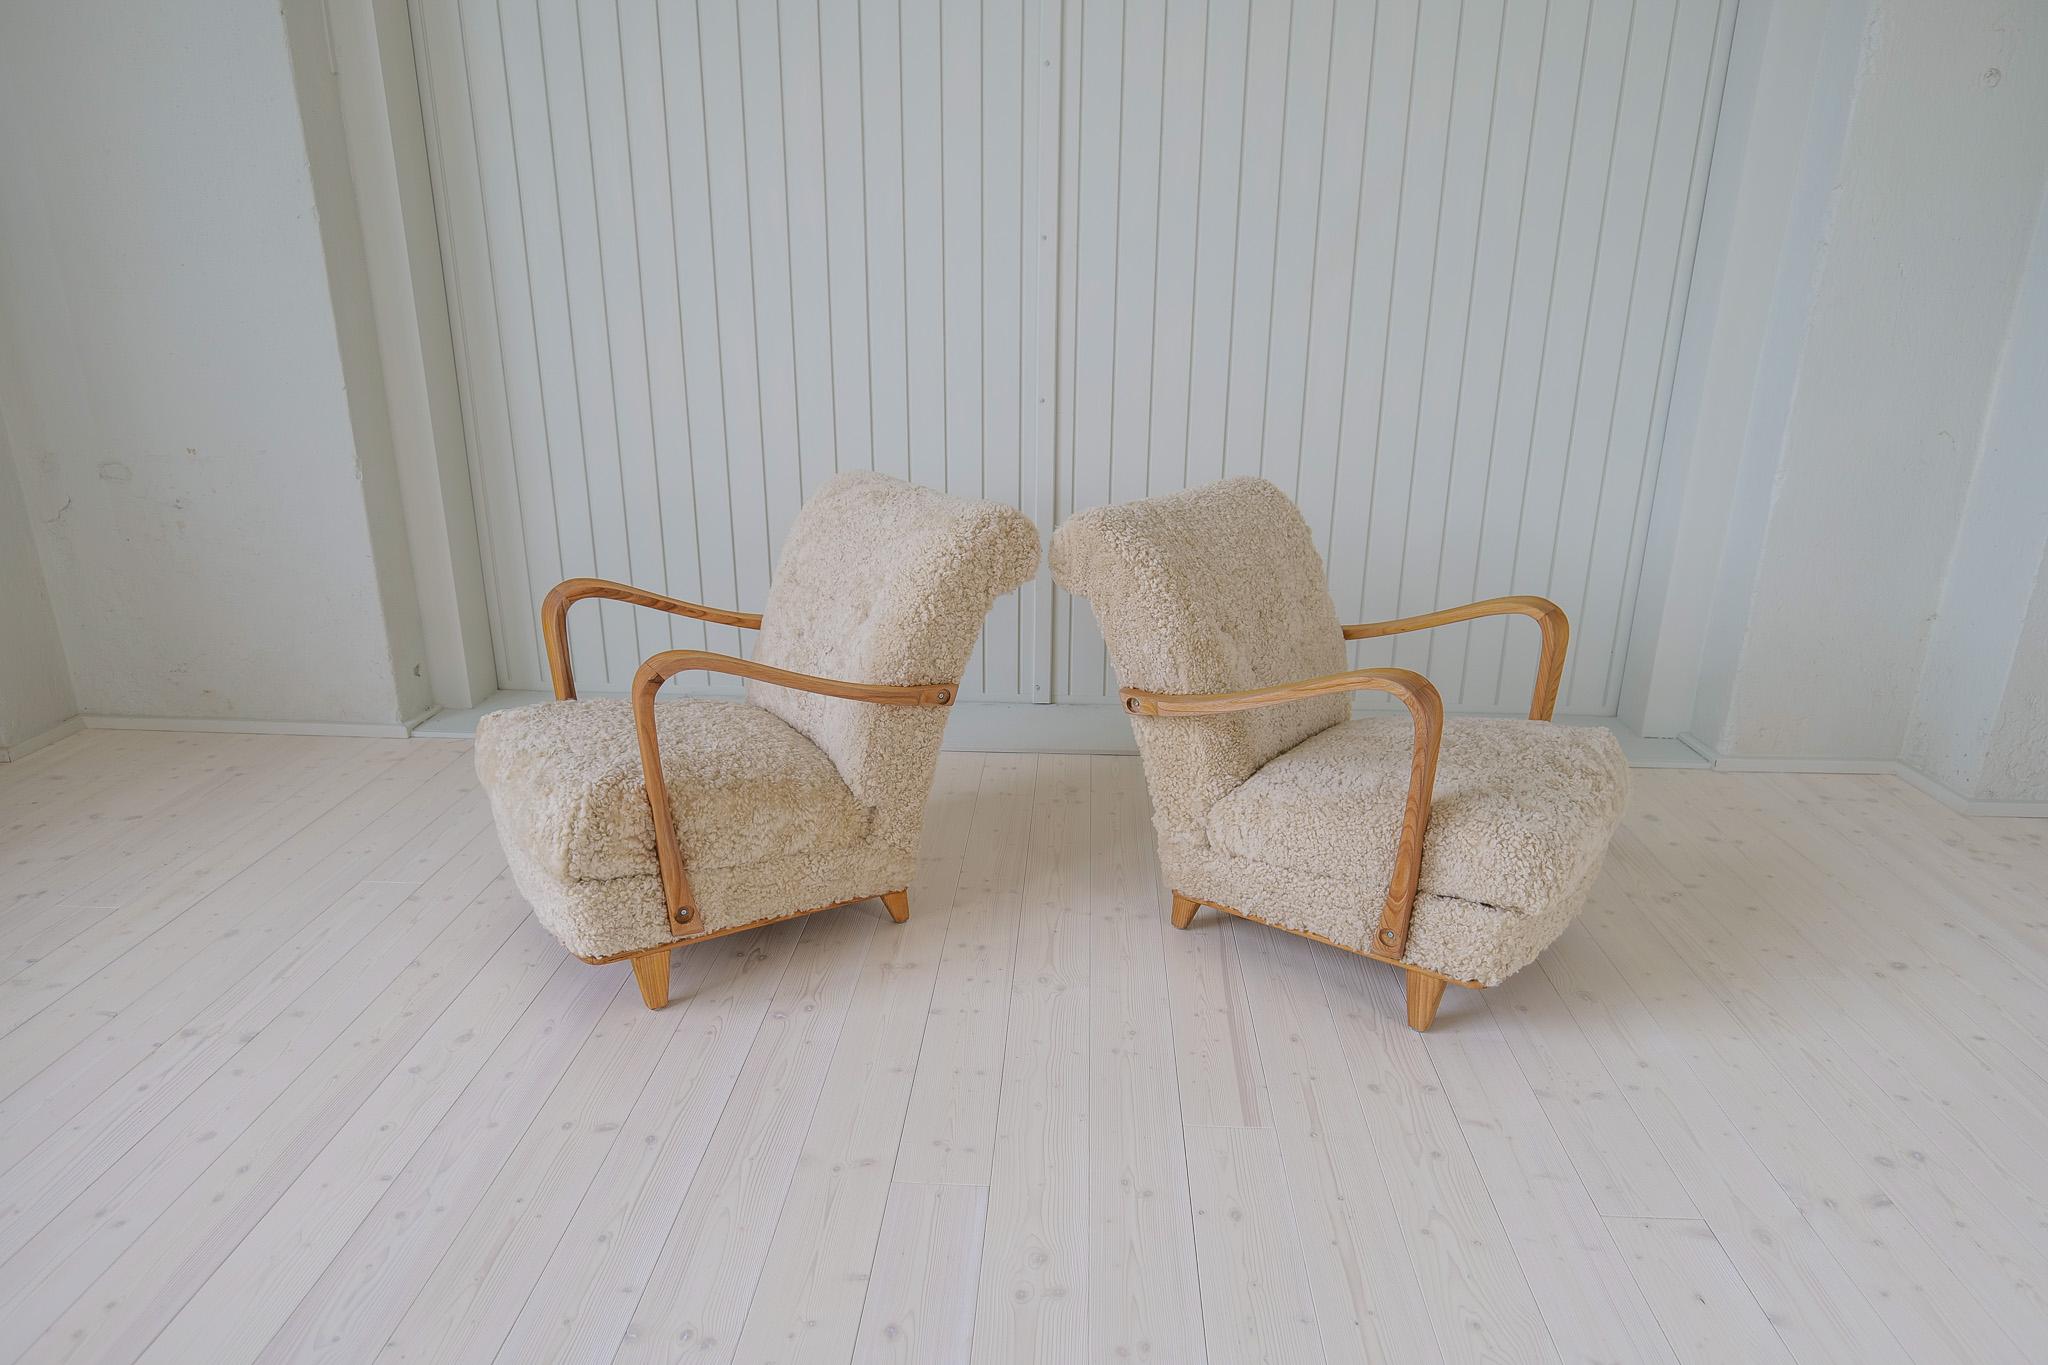 Swedish Modern Lounge Chairs in Shearling / Sheepskin and Elm, 1940s For Sale 5